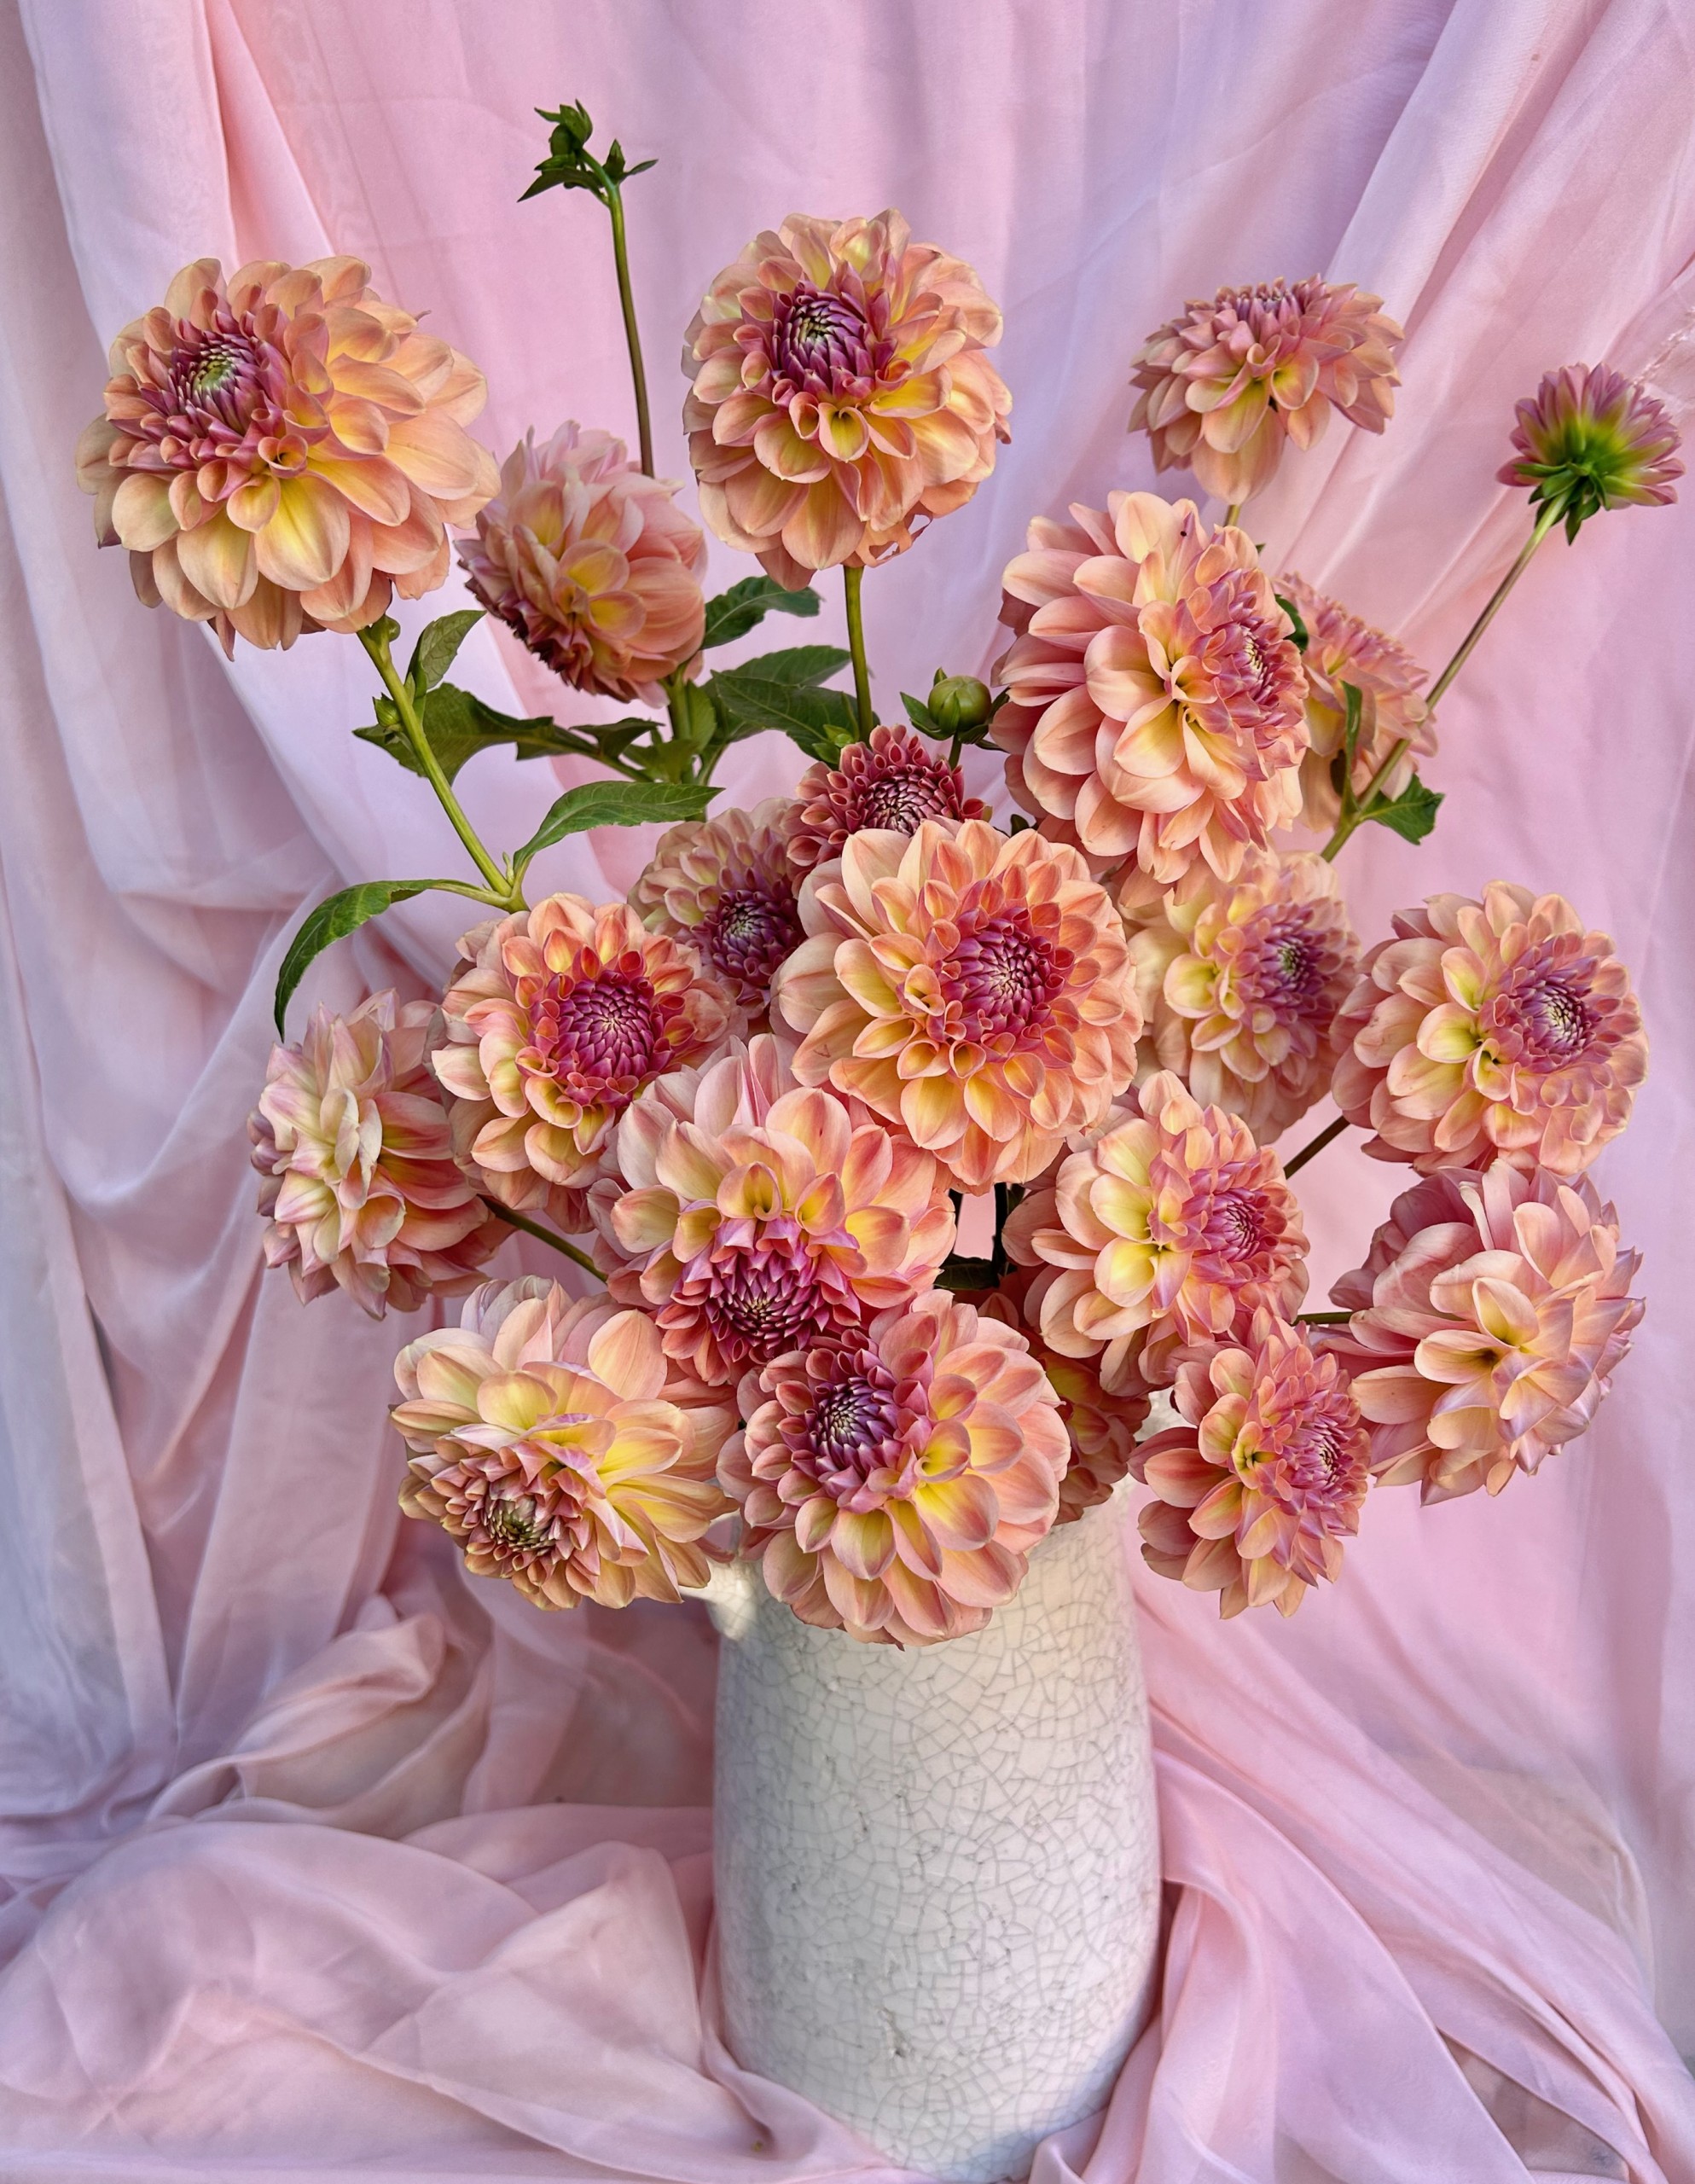 A vase of beautiful apricot dahlia flowers. Locally picked in Wagga Wagga